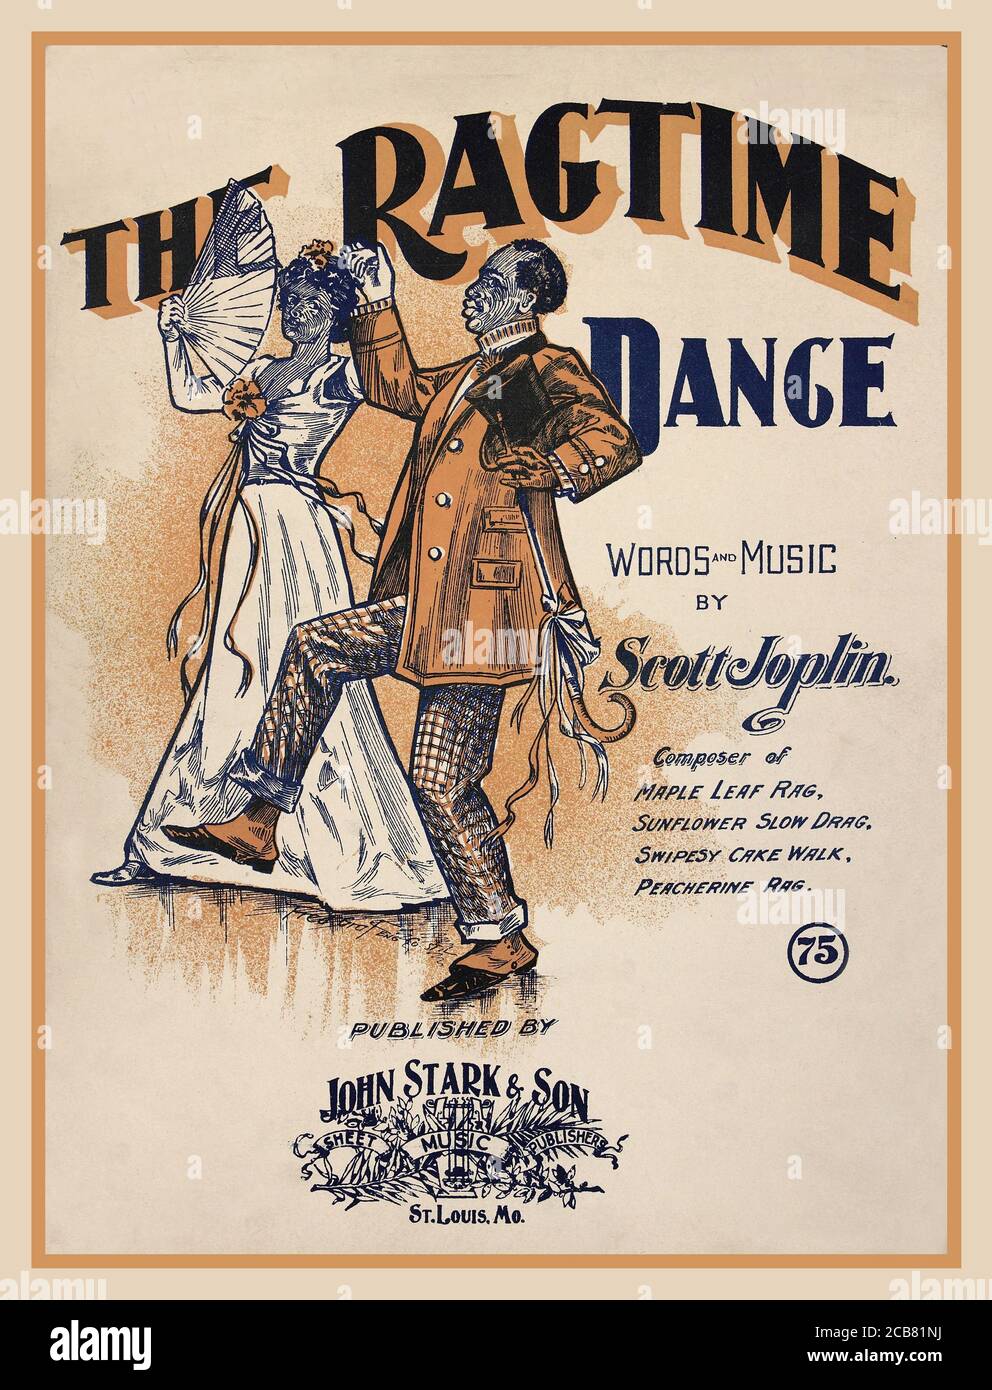 Archive 1900's SCOTT JOPLIN The Ragtime Dance Music Cover art for the 1906 sheet music Ragtime Dance A Stop-Time Two Step 1902 & 1906 Publisher John Stark & Son Piano Solo Marvin Hamlisch incorporated 'The Ragtime Dance' into a medley for the soundtrack of the Oscar-winning 1973 film The Sting. The song also appeared in the soundtrack of the 1978 film Pretty Baby and the 1980 Broadway musical revue Tintypes Stock Photo